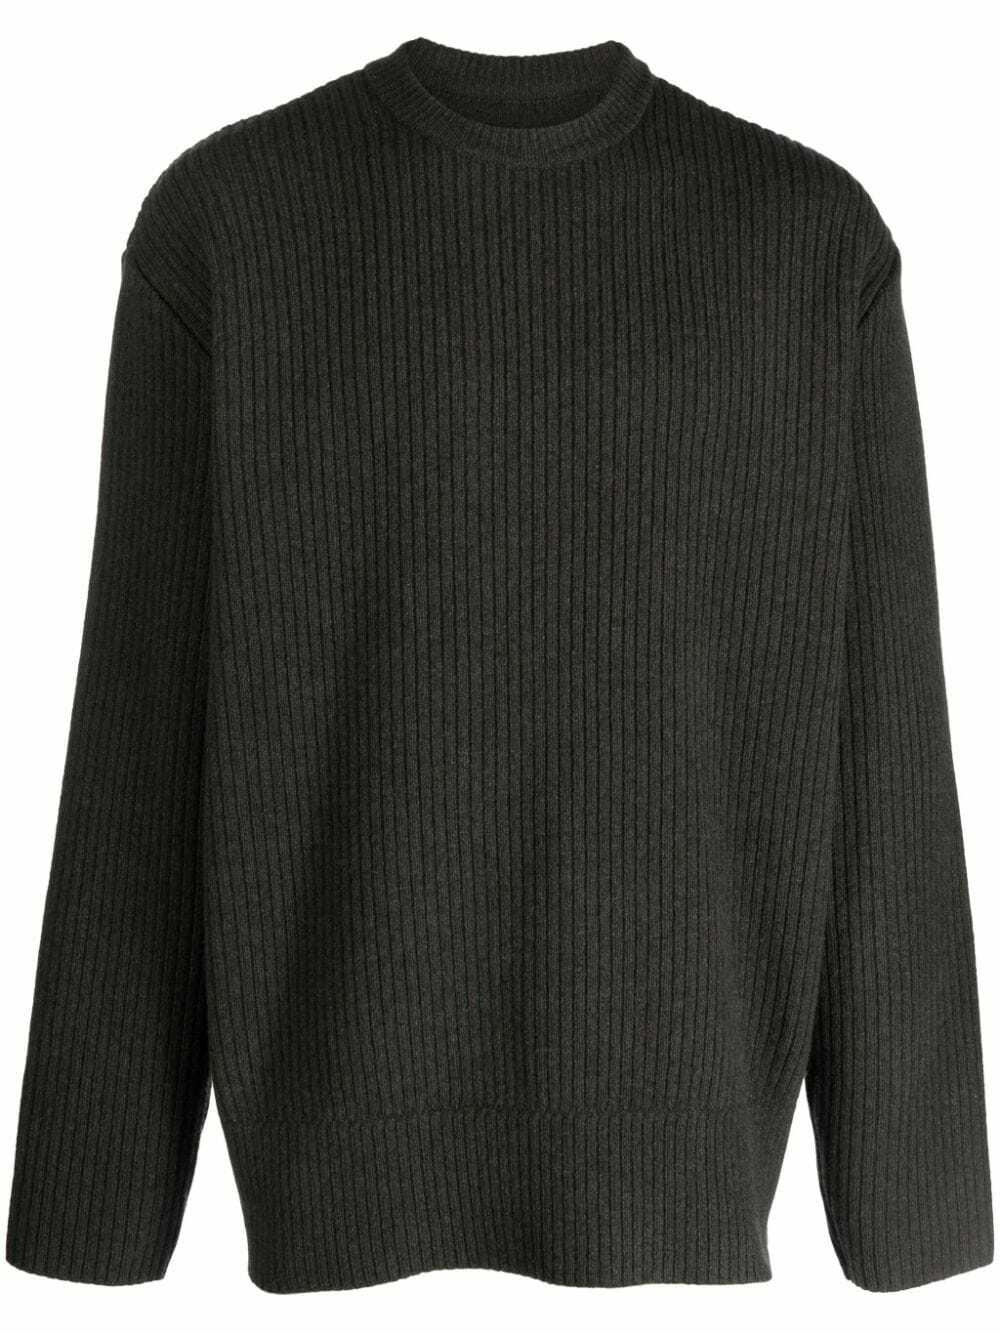 GIVENCHY + Disney Oswald Slim-Fit Intarsia Wool Sweater for Men